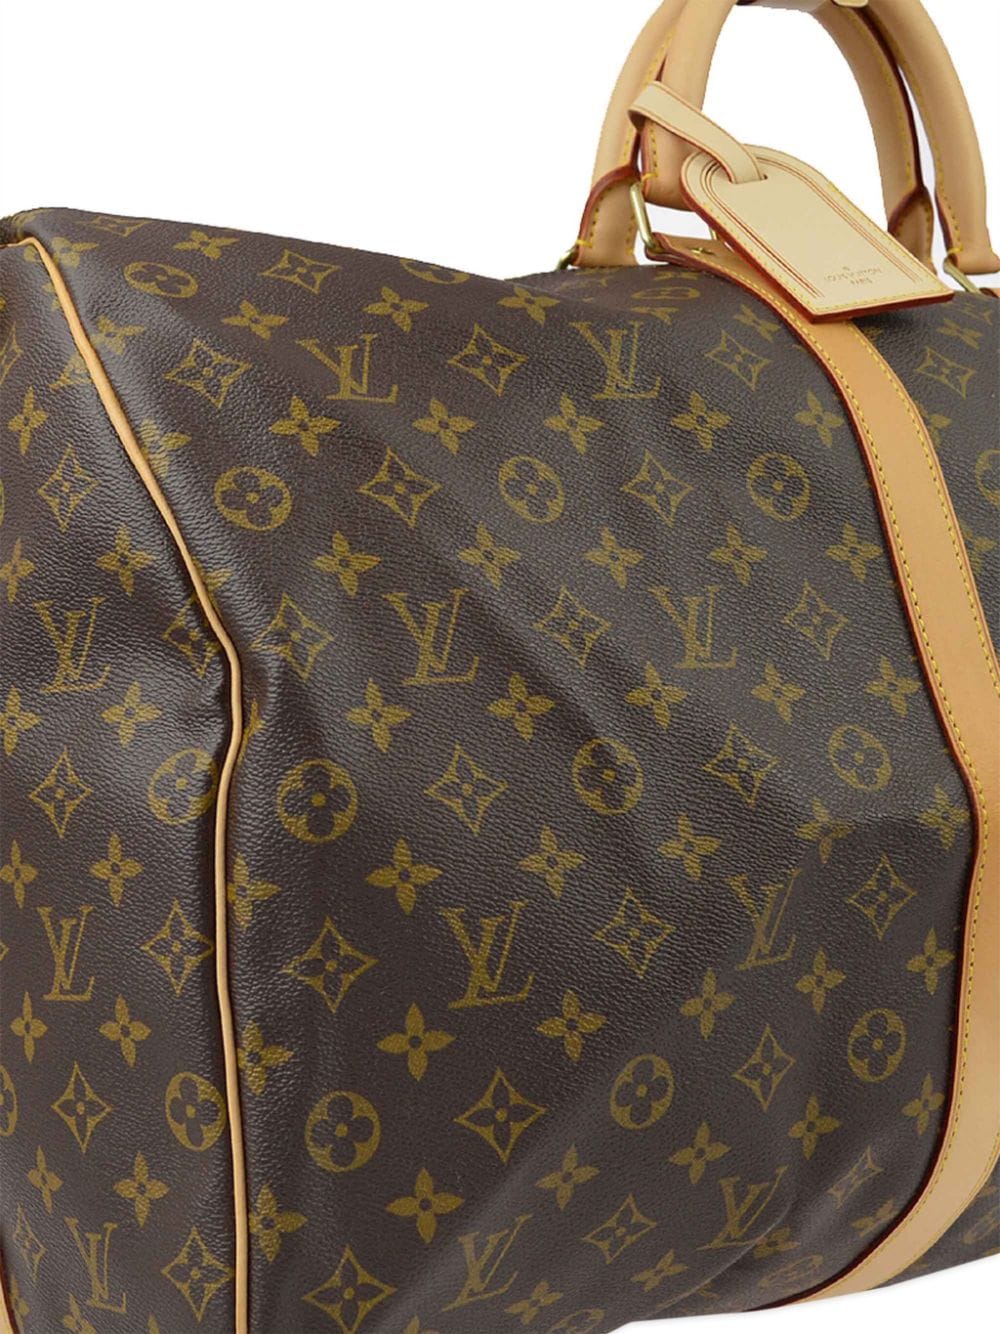 Pre-owned Louis Vuitton Keepall Bandouliere 60 两用旅行包（2009年典藏款） In Brown